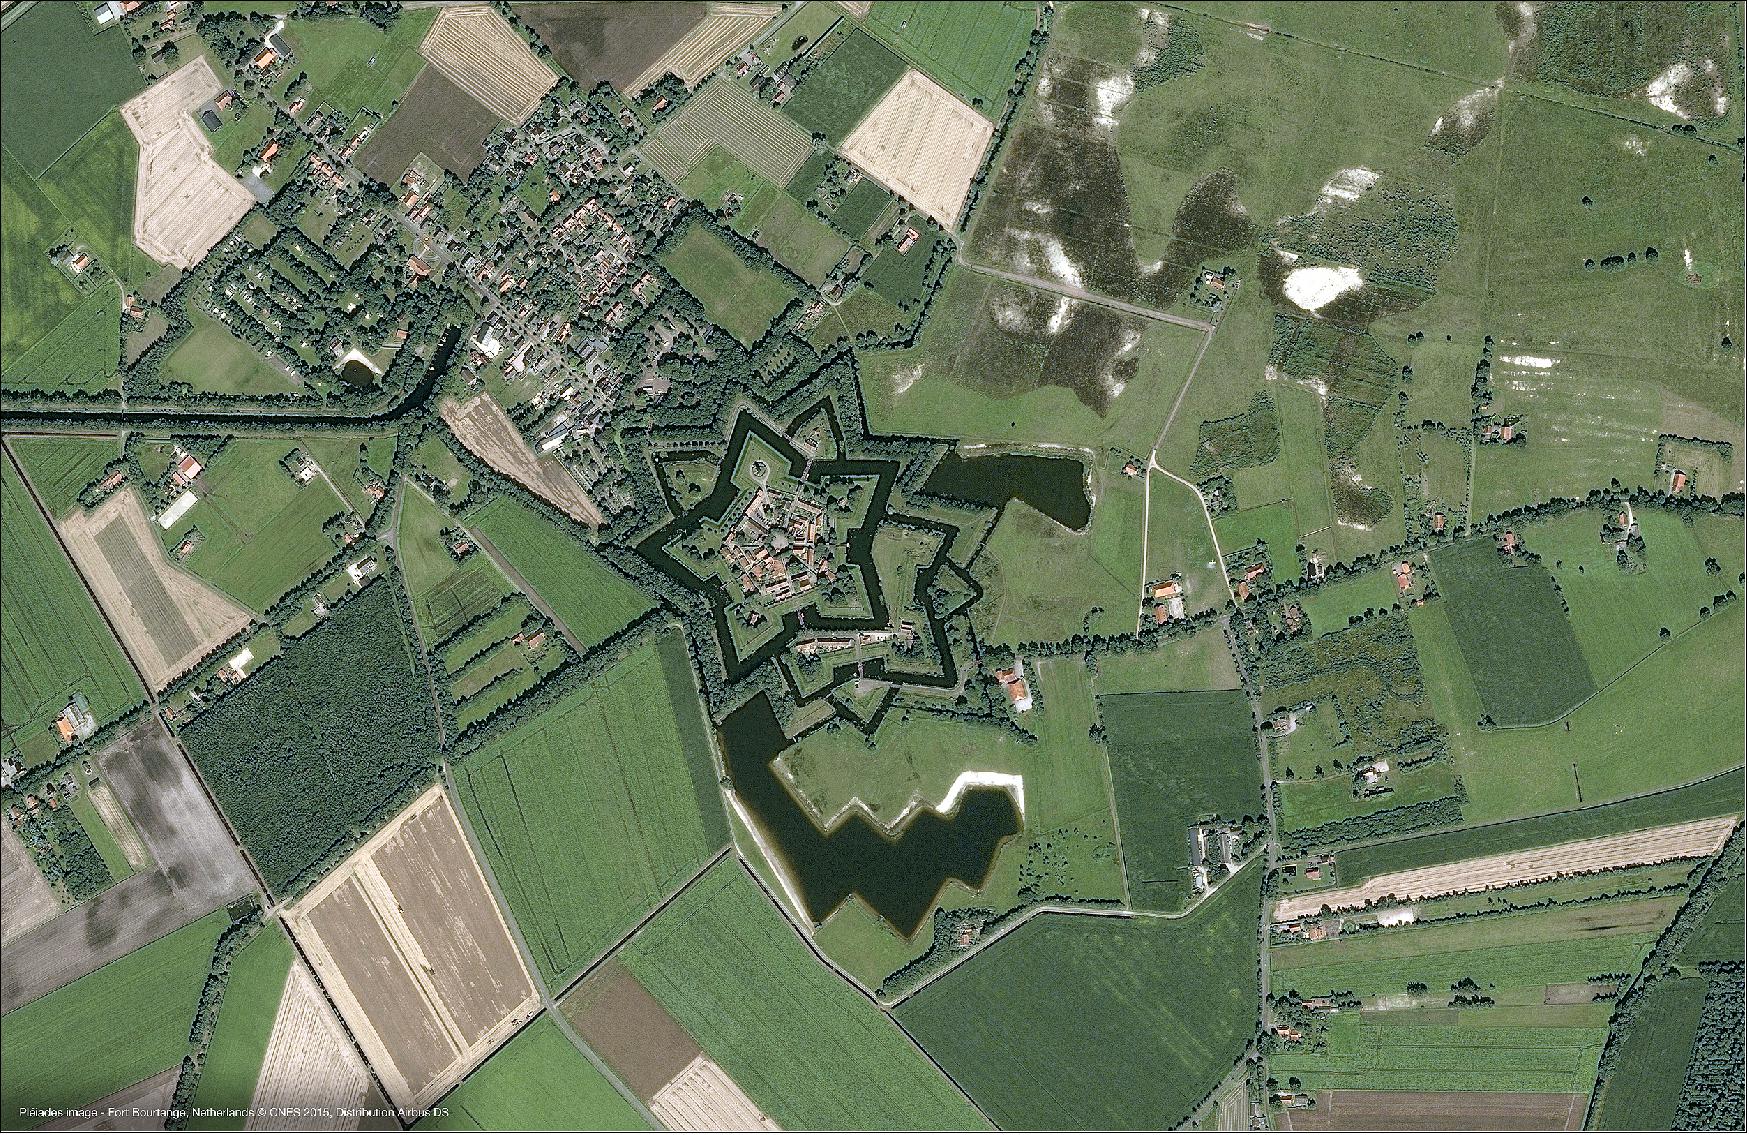 Figure 15: Pleiades image of Fort Bourtange, The Netherlands, acquired in 2015 (image credit: CNES, distribution: Airbus DS)